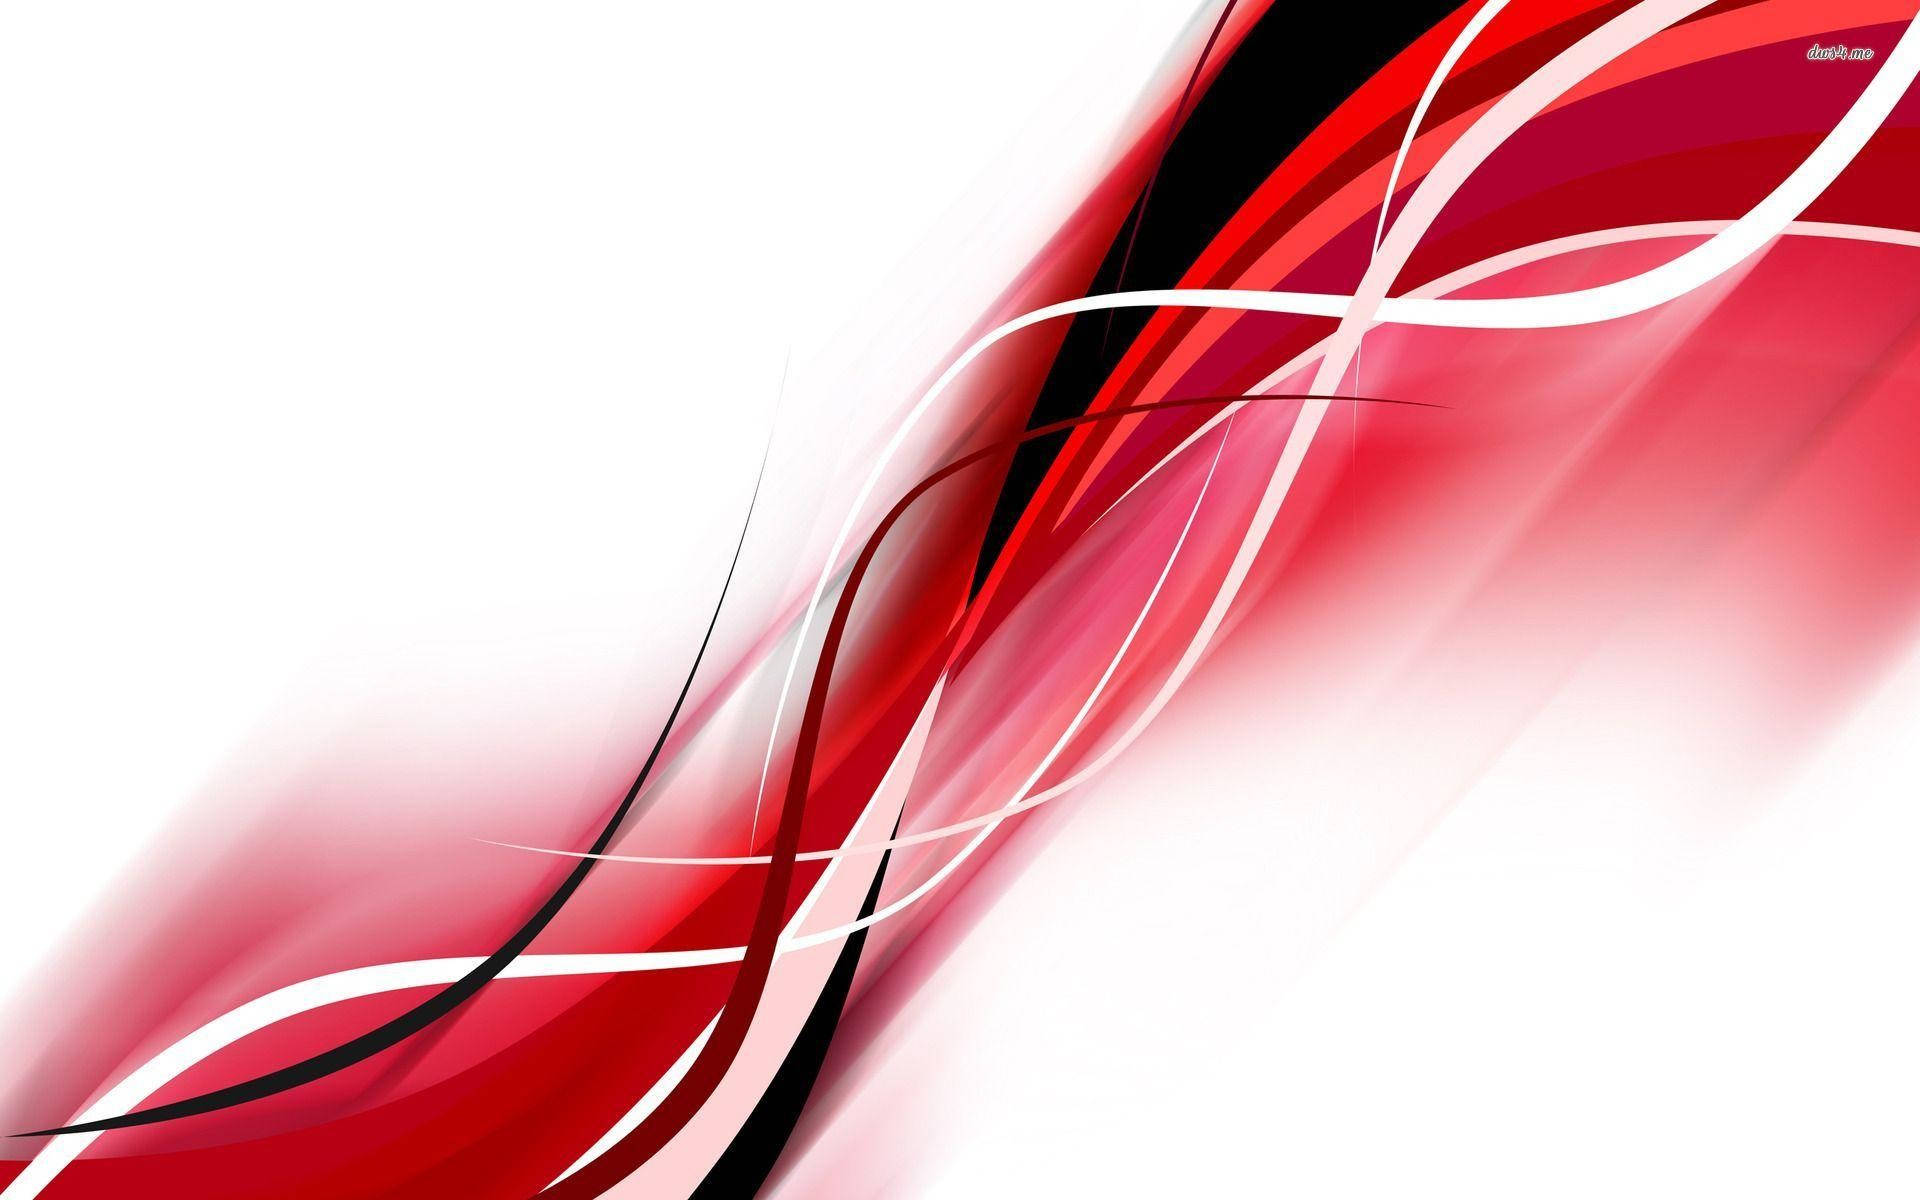 Swirling Red And White Helix Wallpaper